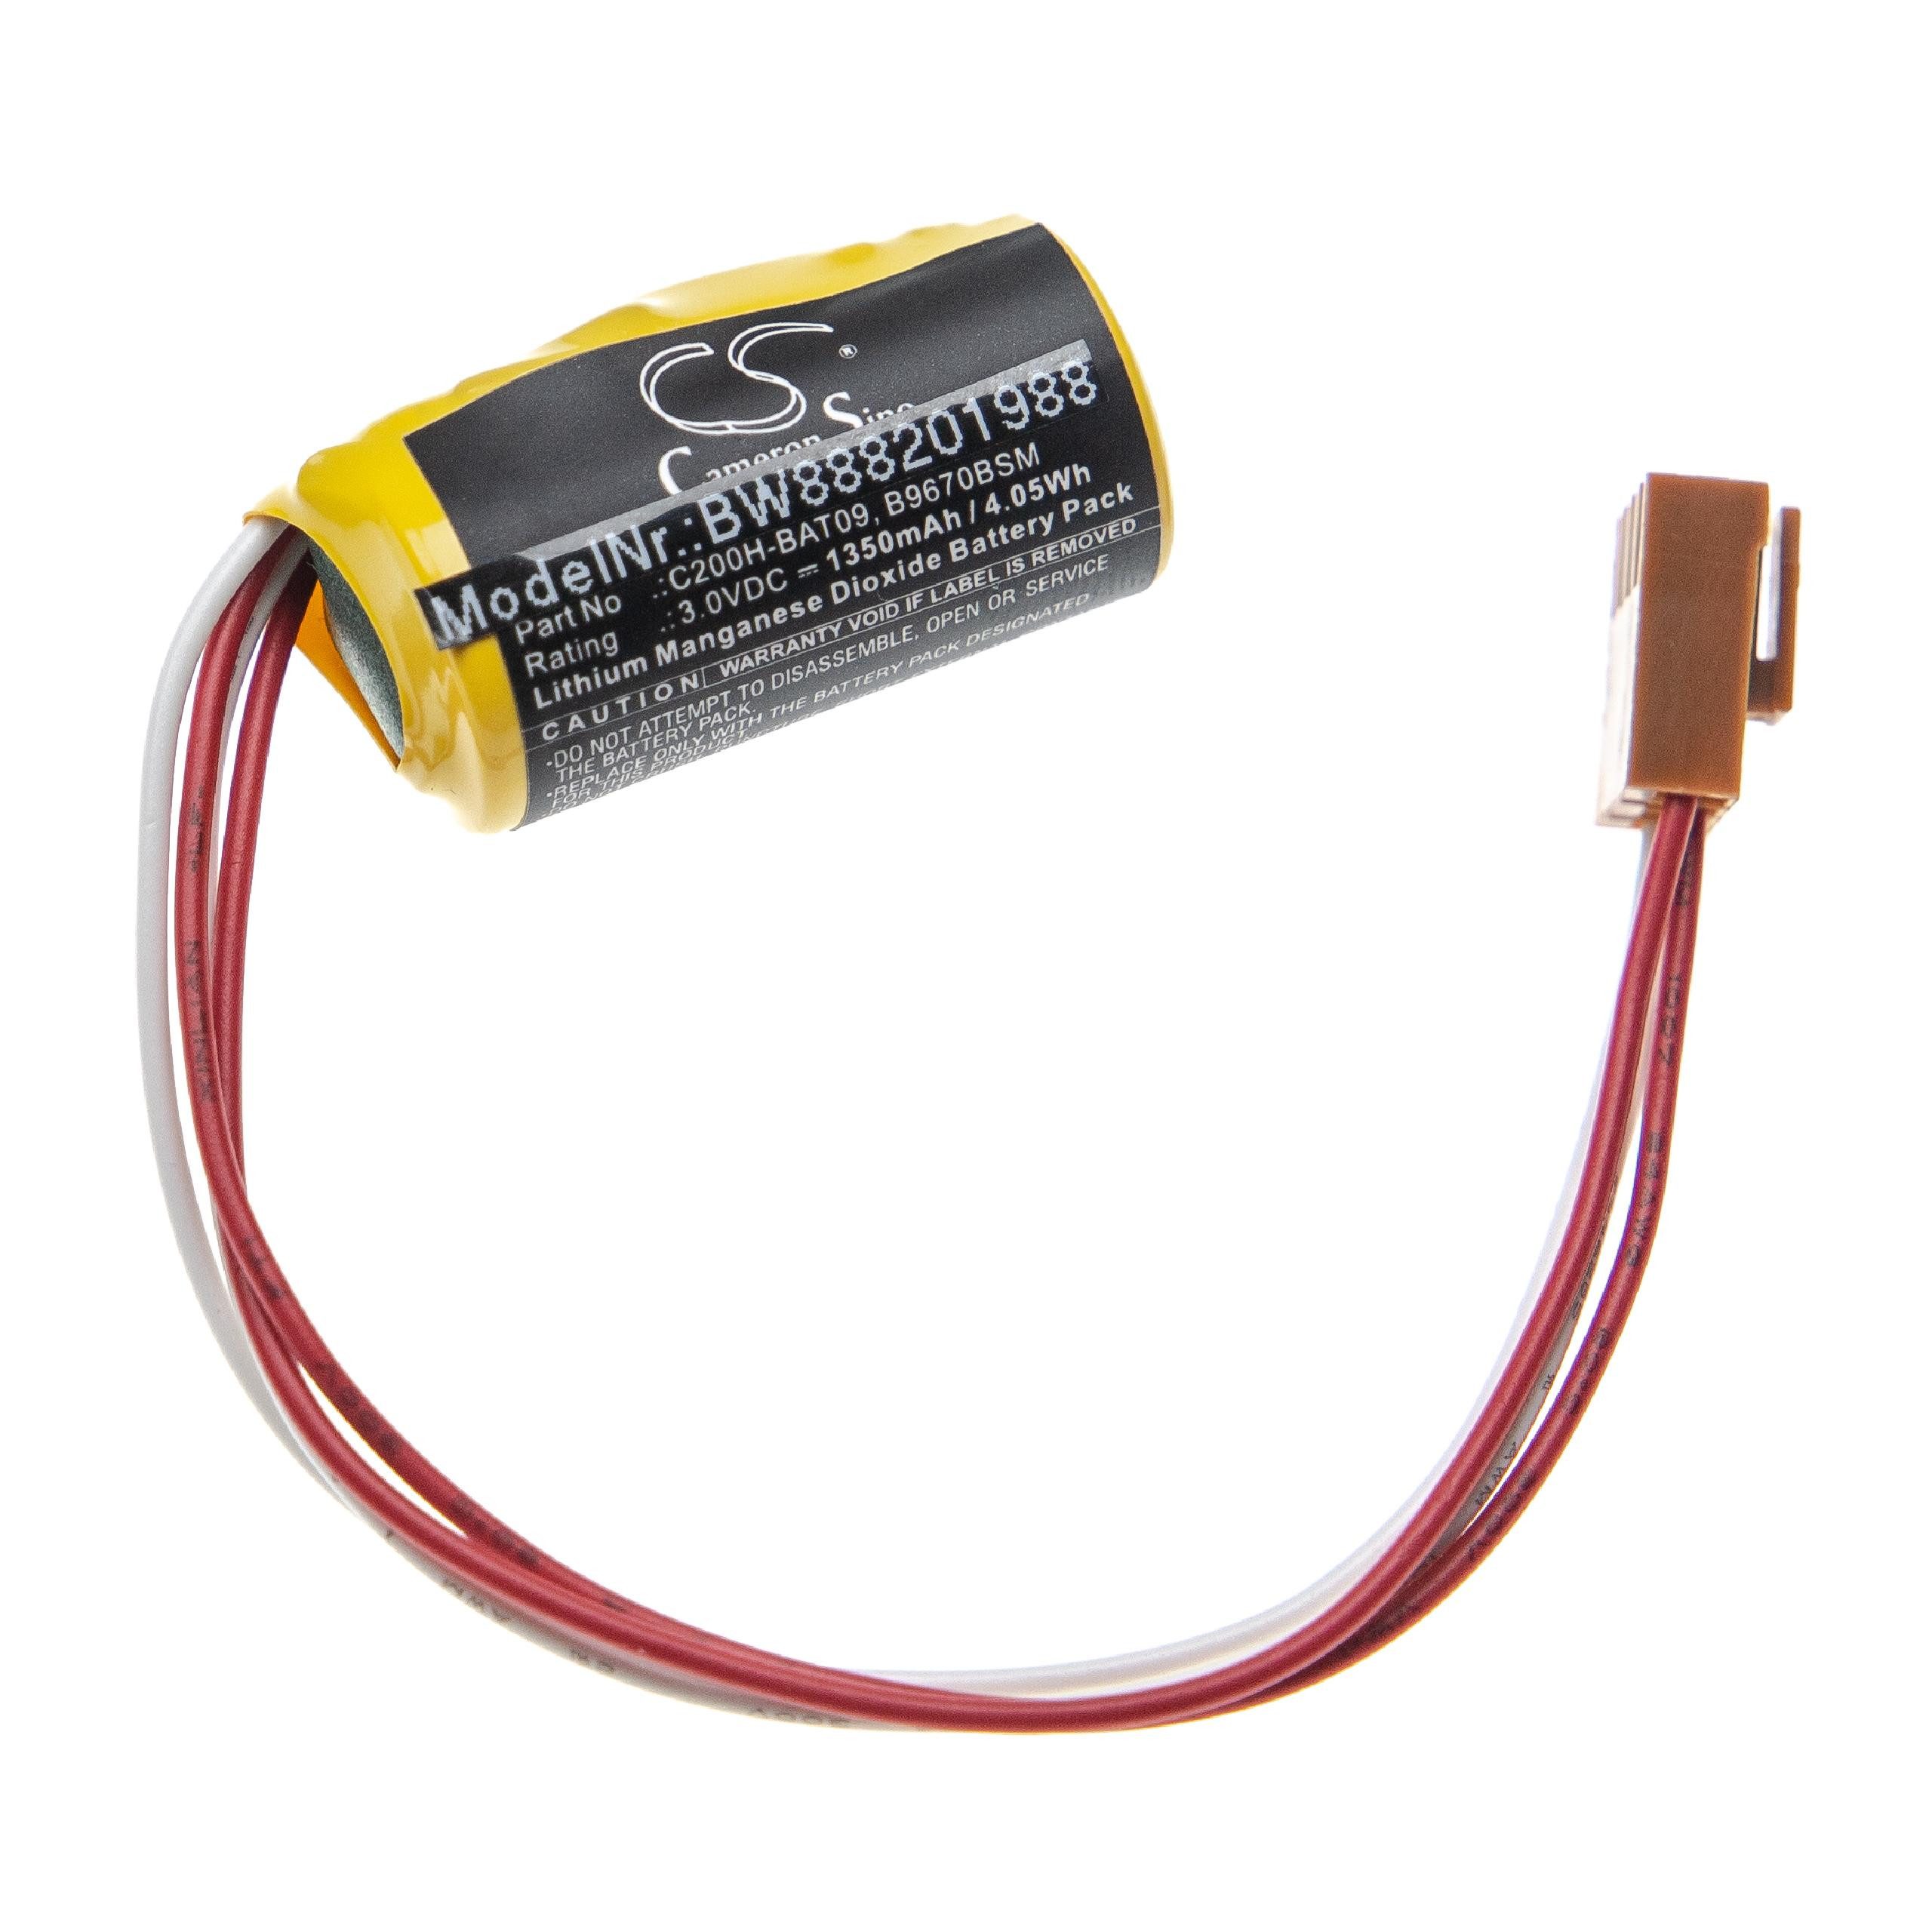 vhbw Batterie, (3.0 V), passend für Omron C60H, FIT10-CPU01 Business & Industrie & Funk Automation